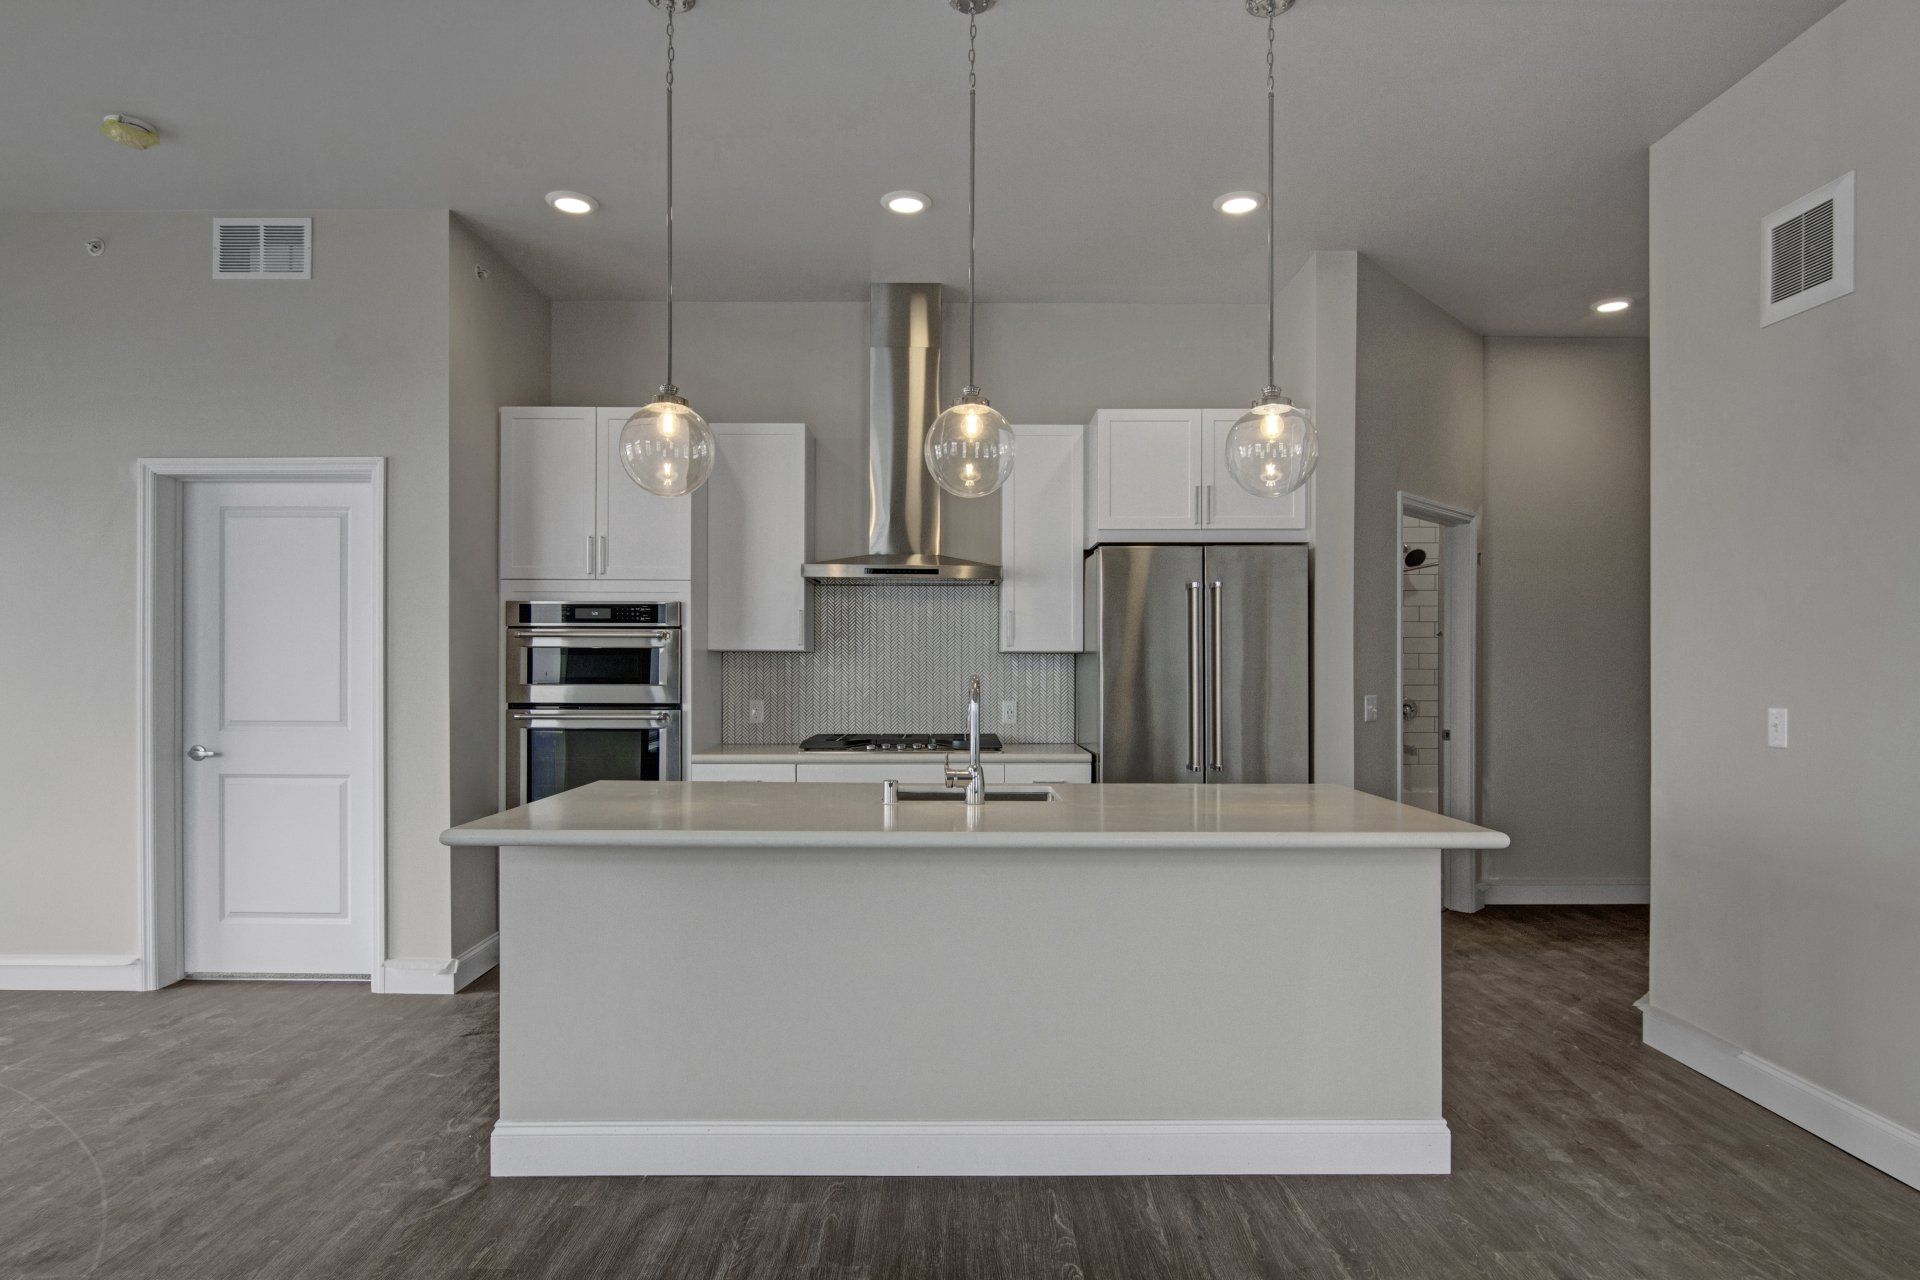 A kitchen with white cabinets, stainless steel appliances, and a large island at Daymark Uptown Apartments.